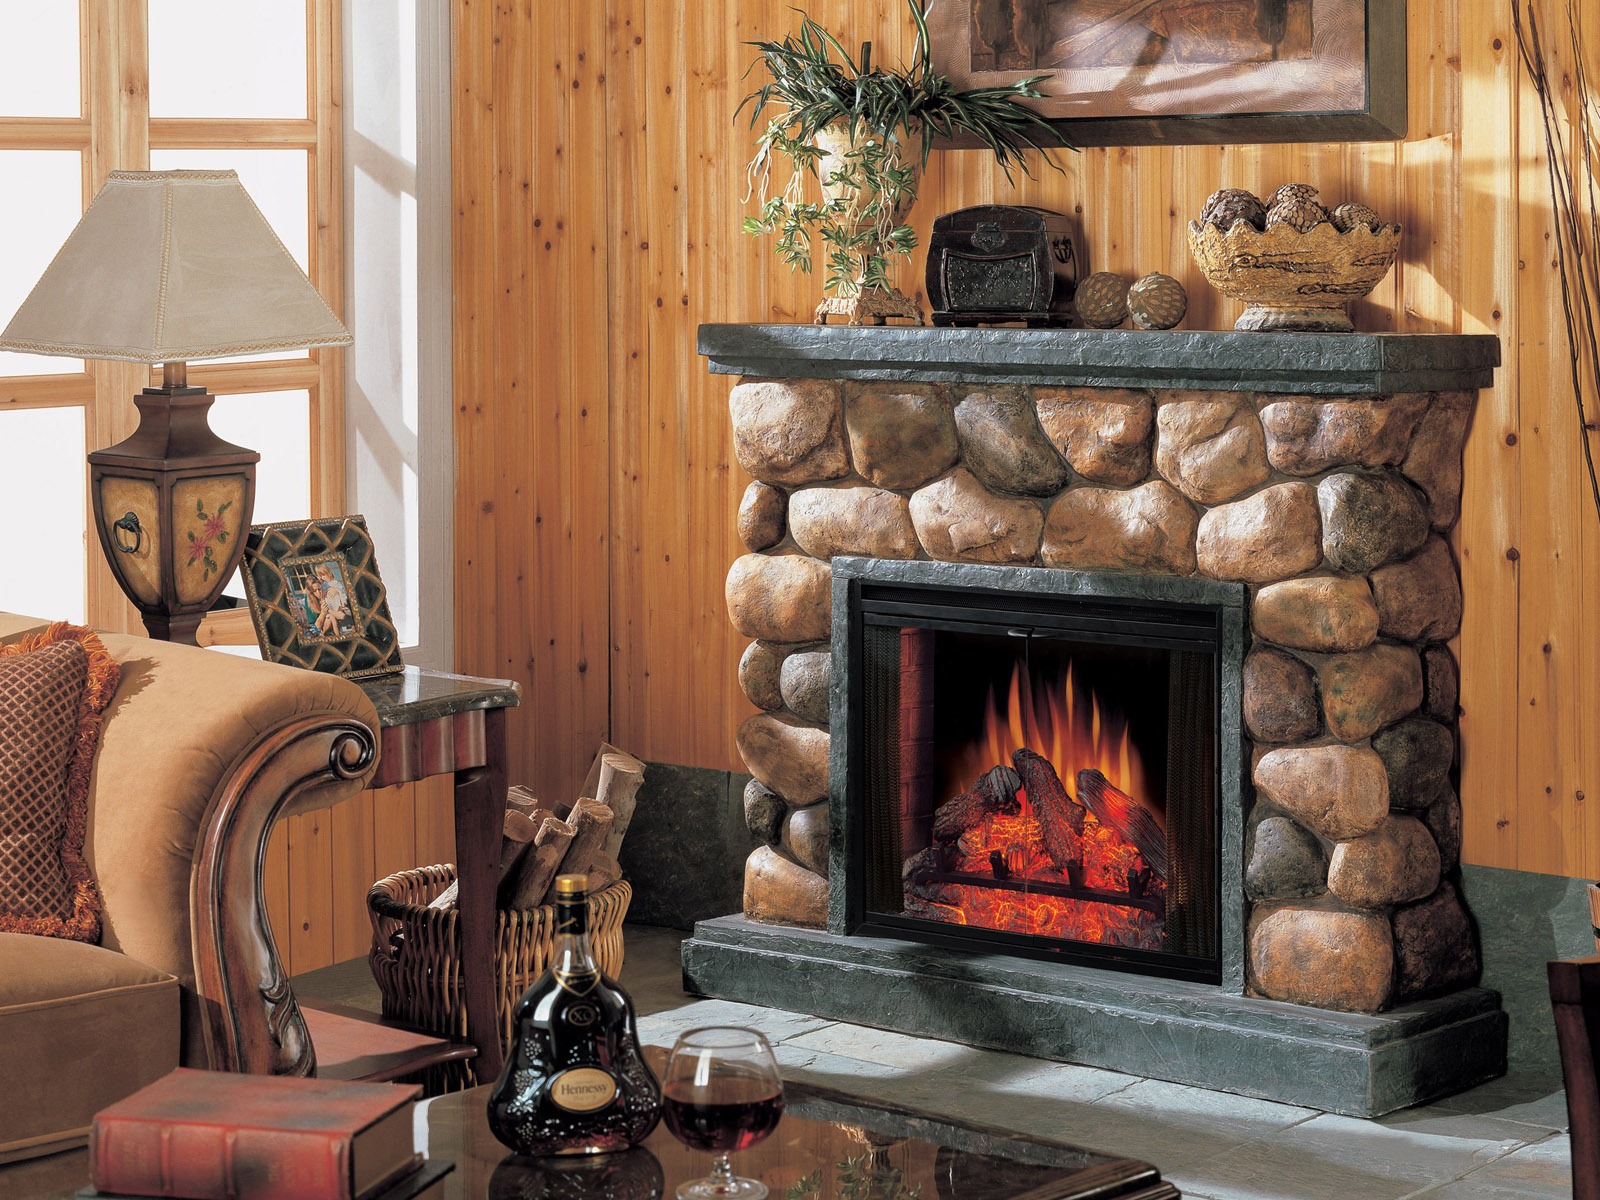 Western-style family fireplace wallpaper (1) #2 - 1600x1200